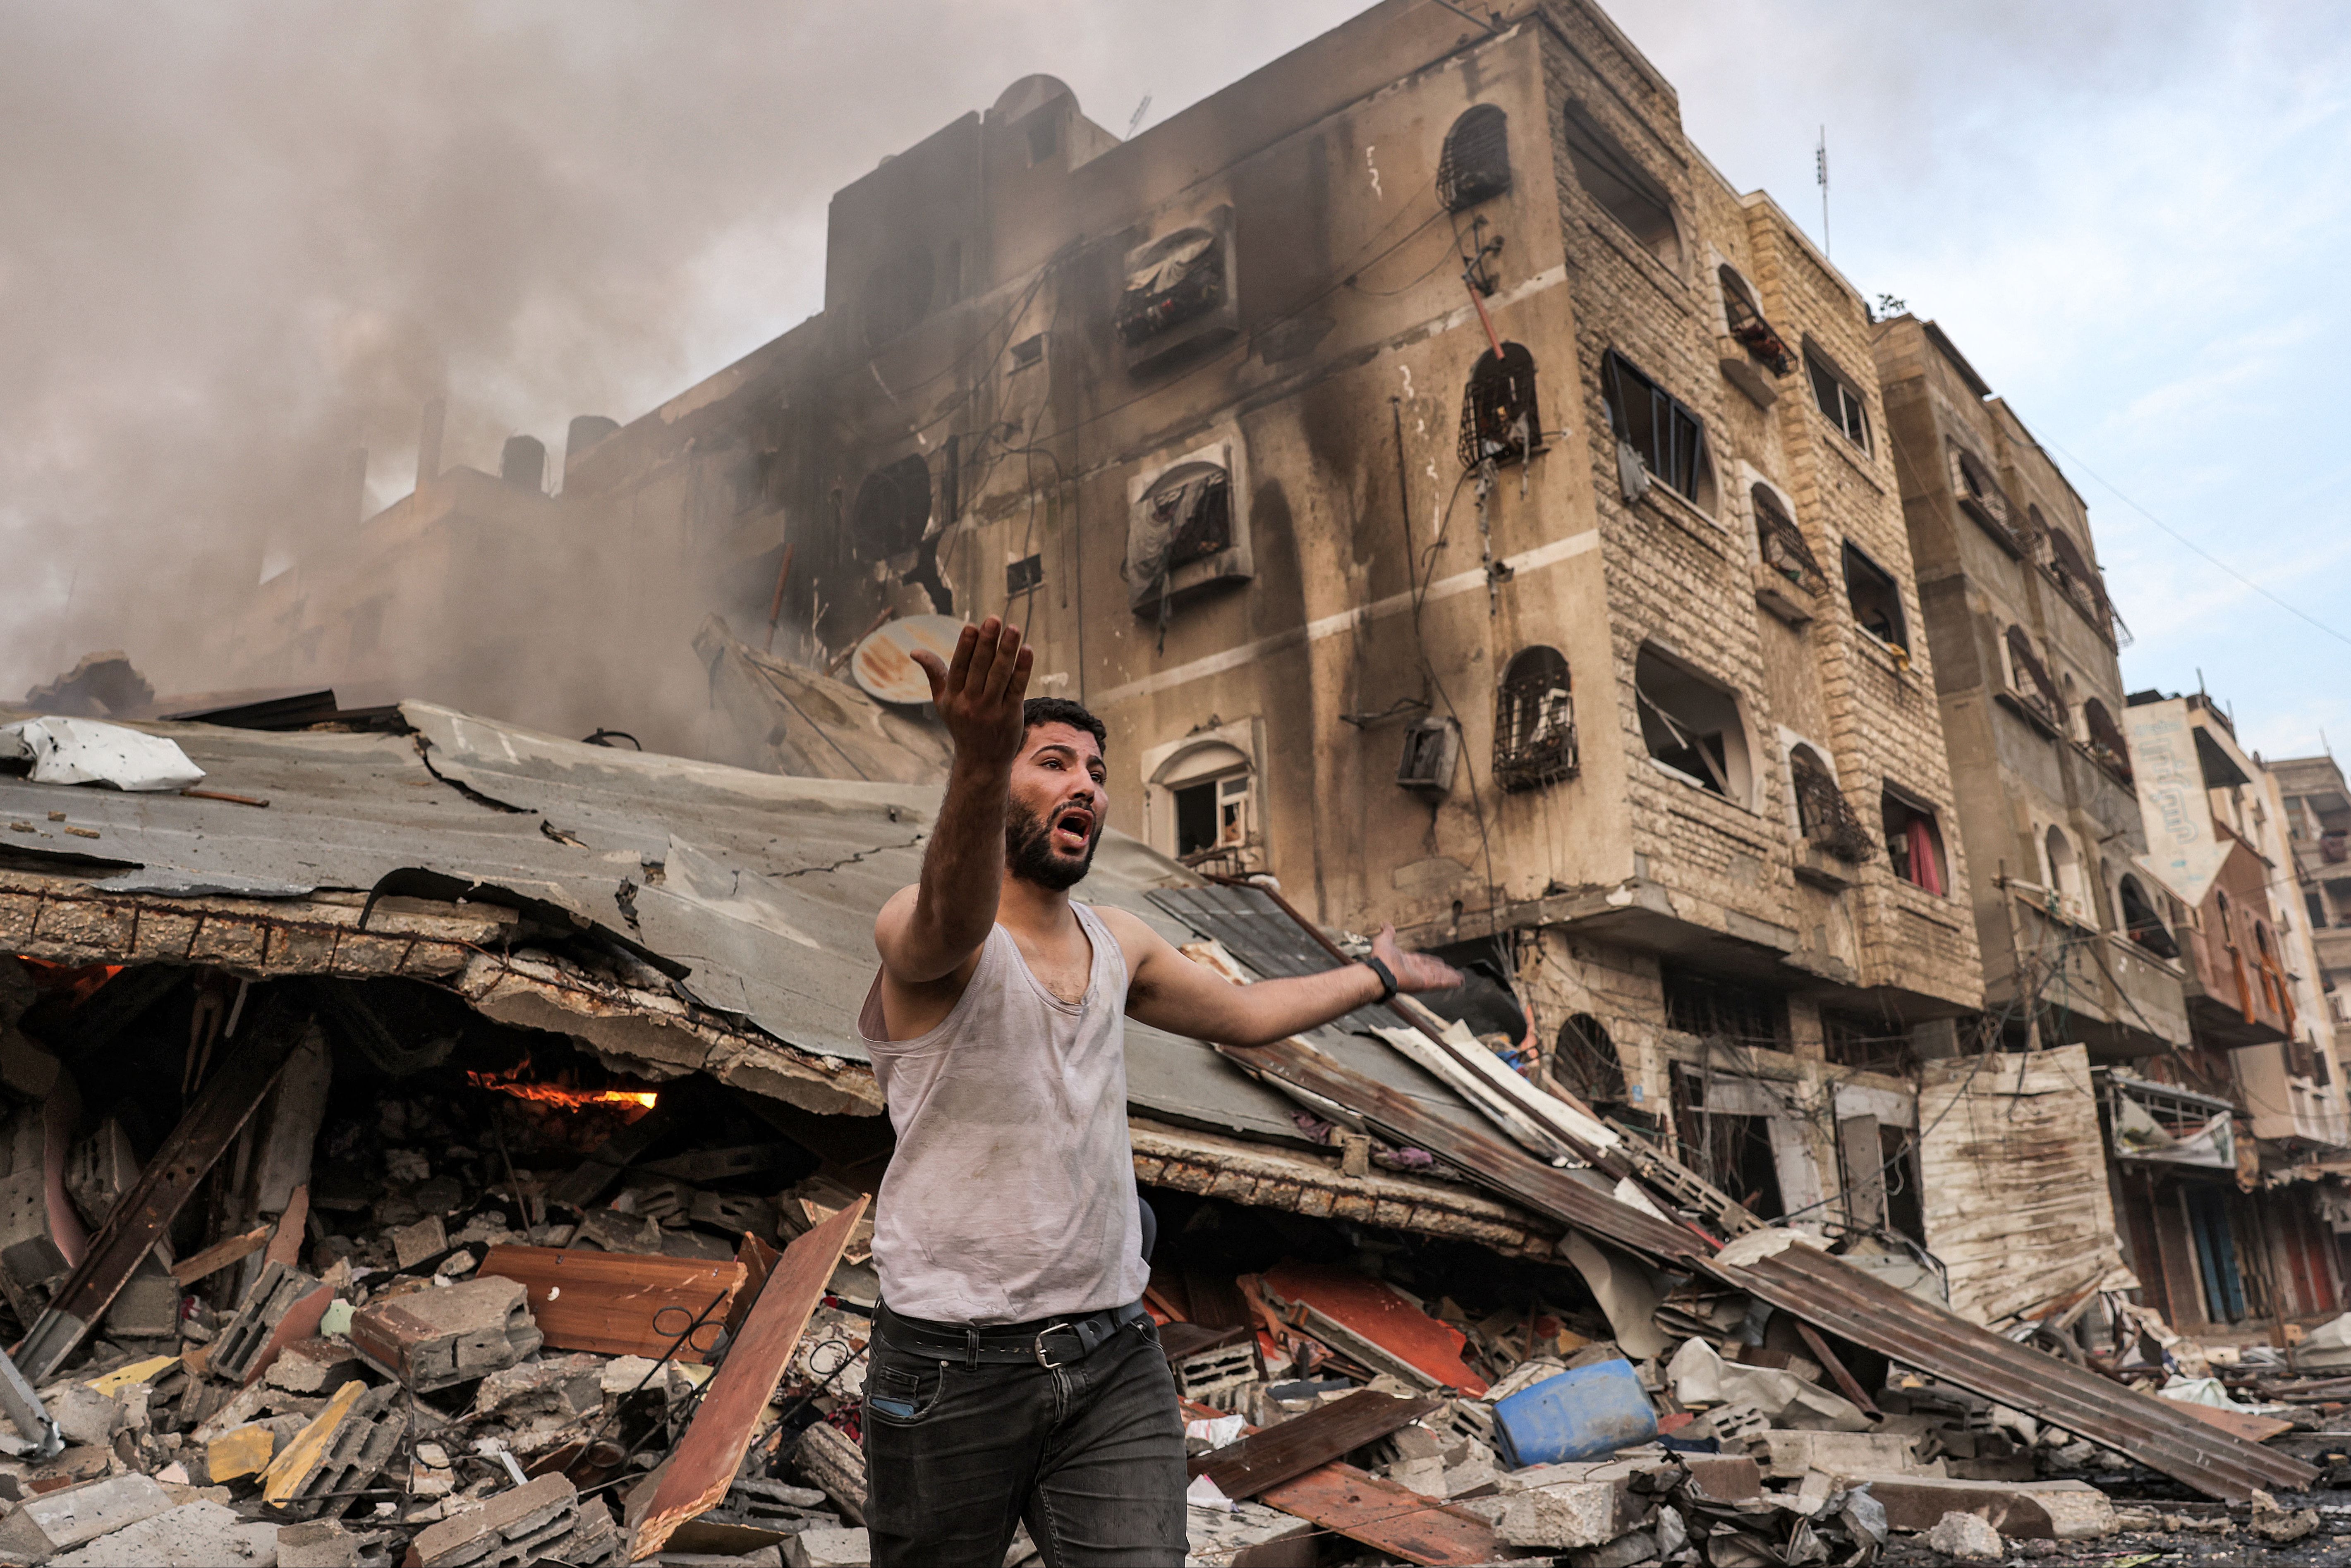 A man reacts outside a burning collapsed building following Israeli bombardment in Gaza City on October 11